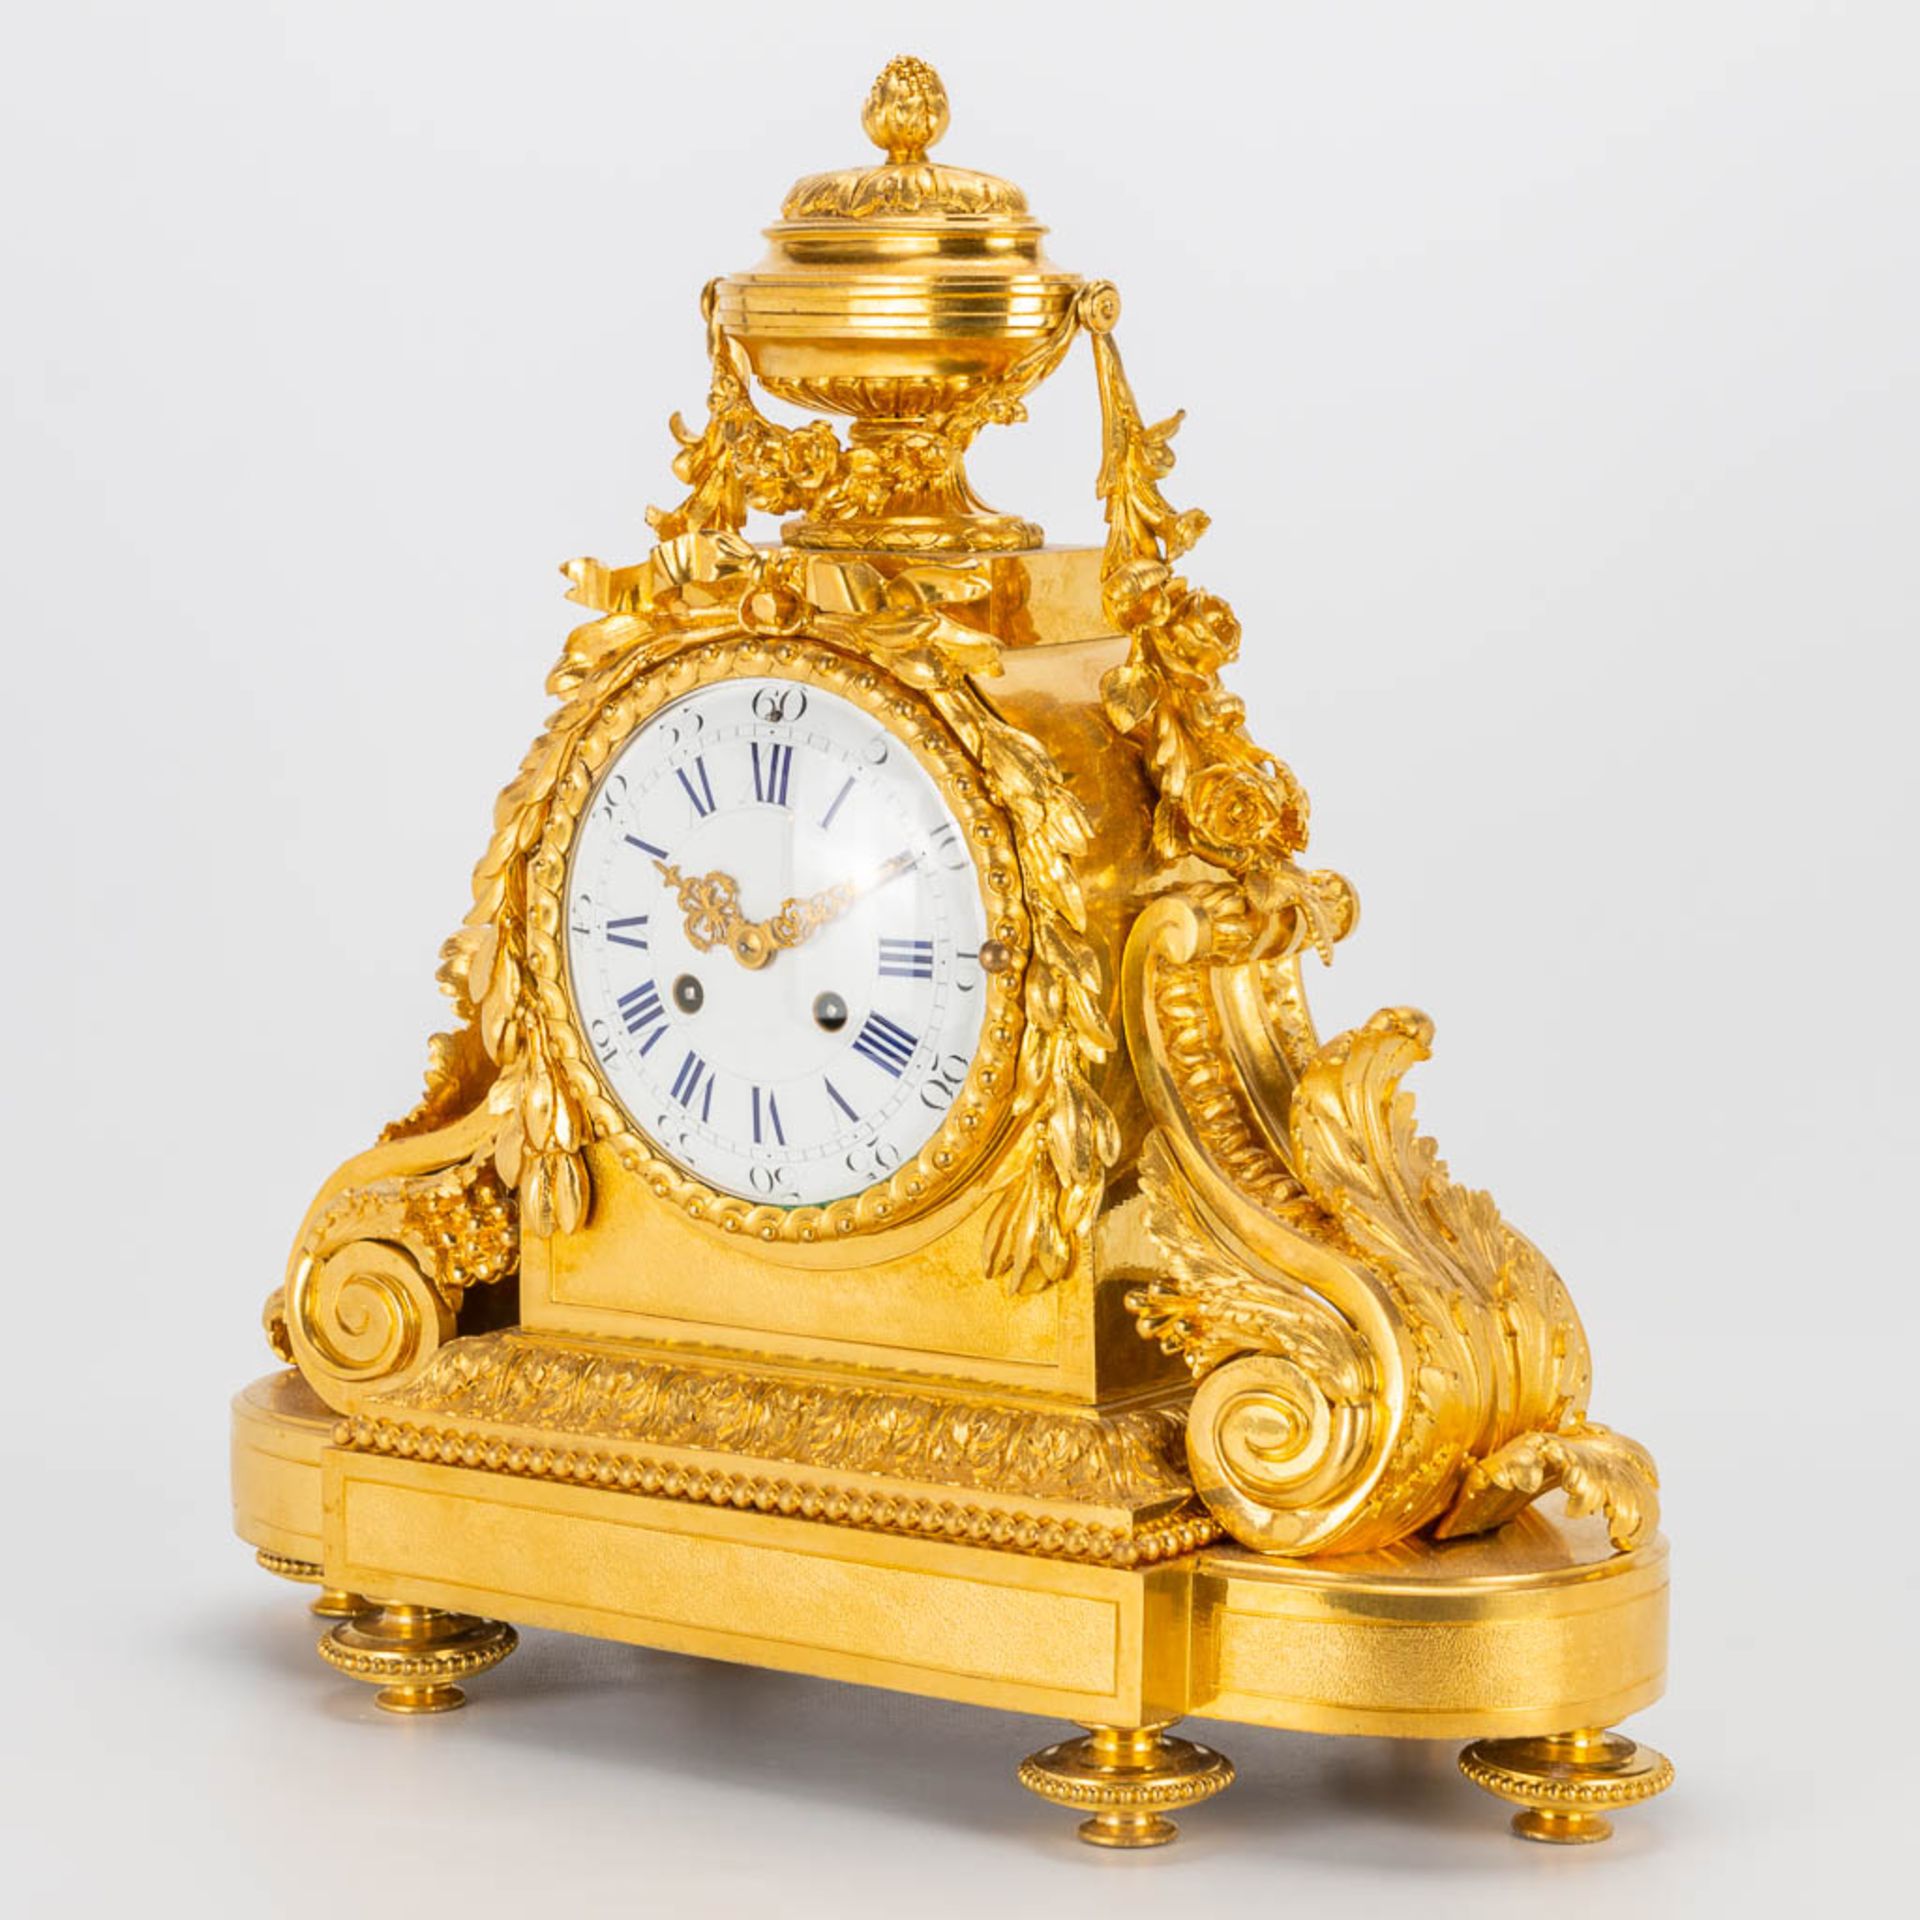 A bronze ormolu table clock made in Louis XVI style. 19th century. (15 x 41 x 42 cm) - Image 9 of 20